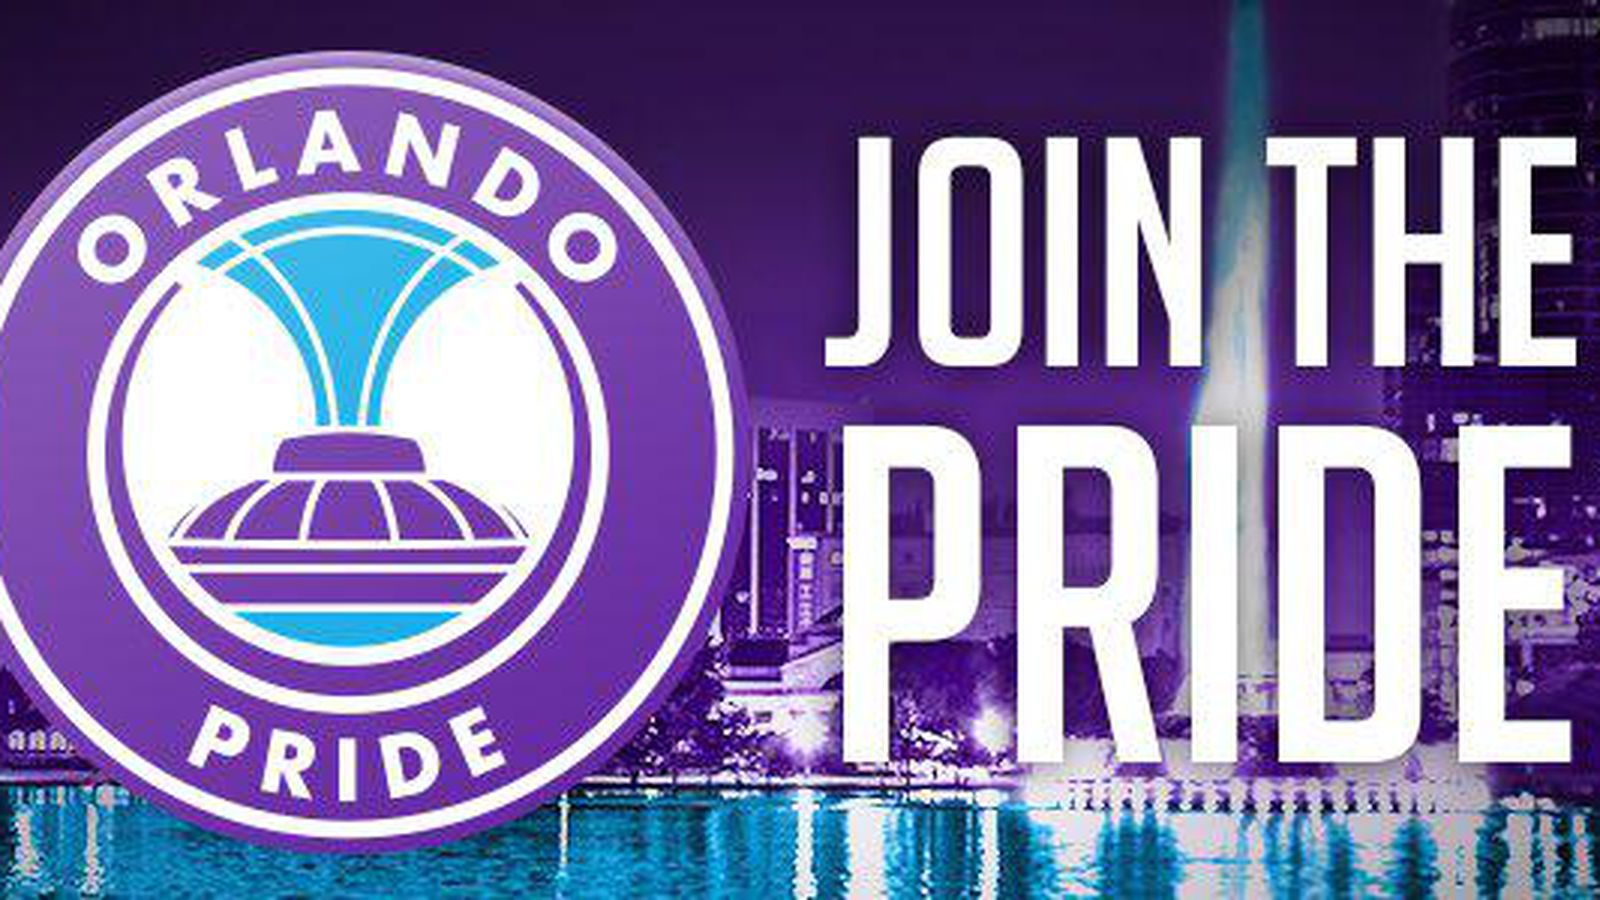 Orlando joins NWSL as expansion club Bent Musket